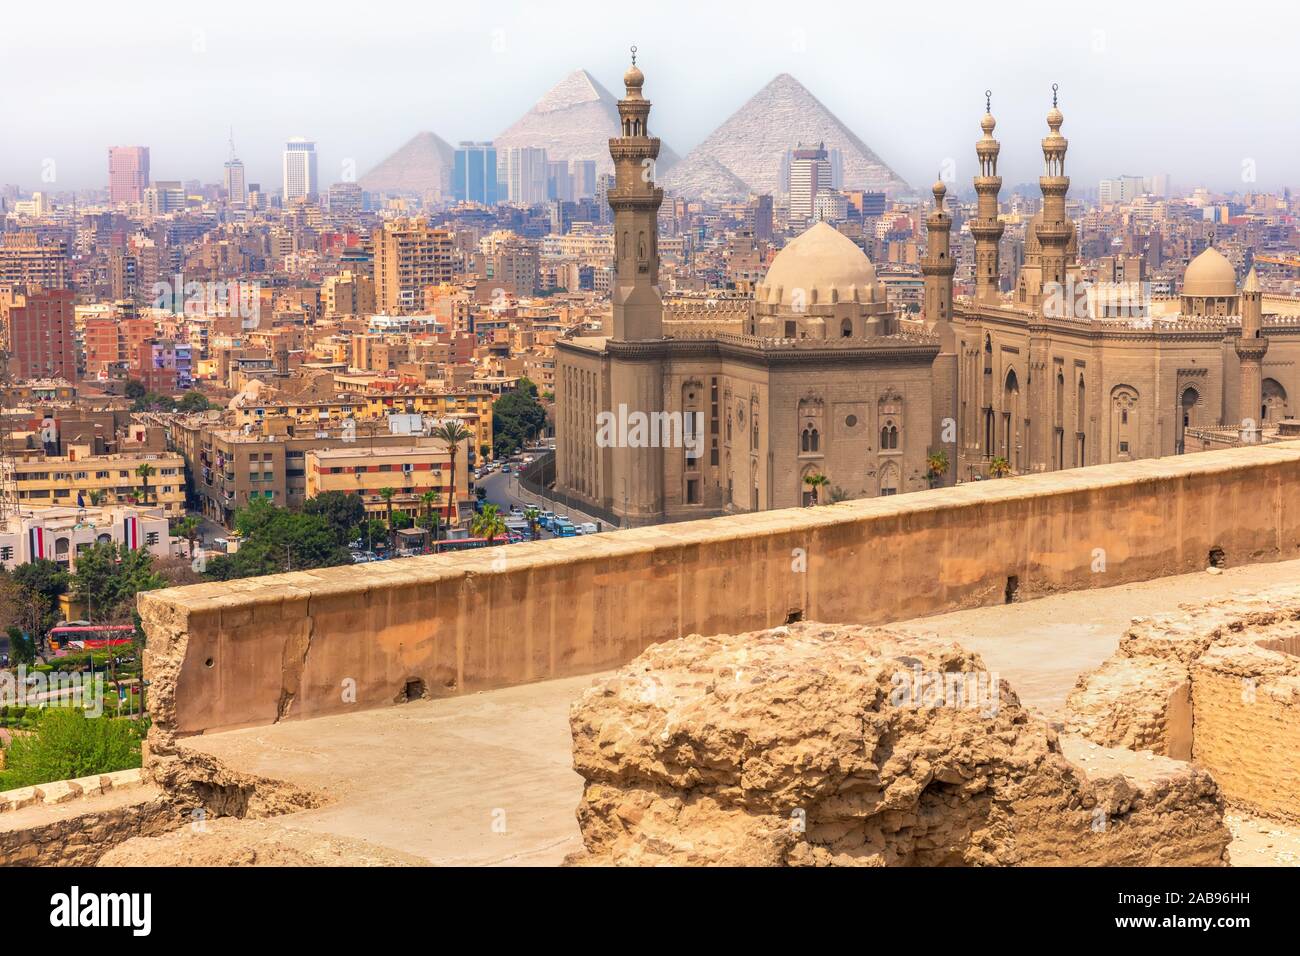 Cairo view, the Mosque-Madrassa of Sultan Hassan and the Pyramids, Egypt. Stock Photo